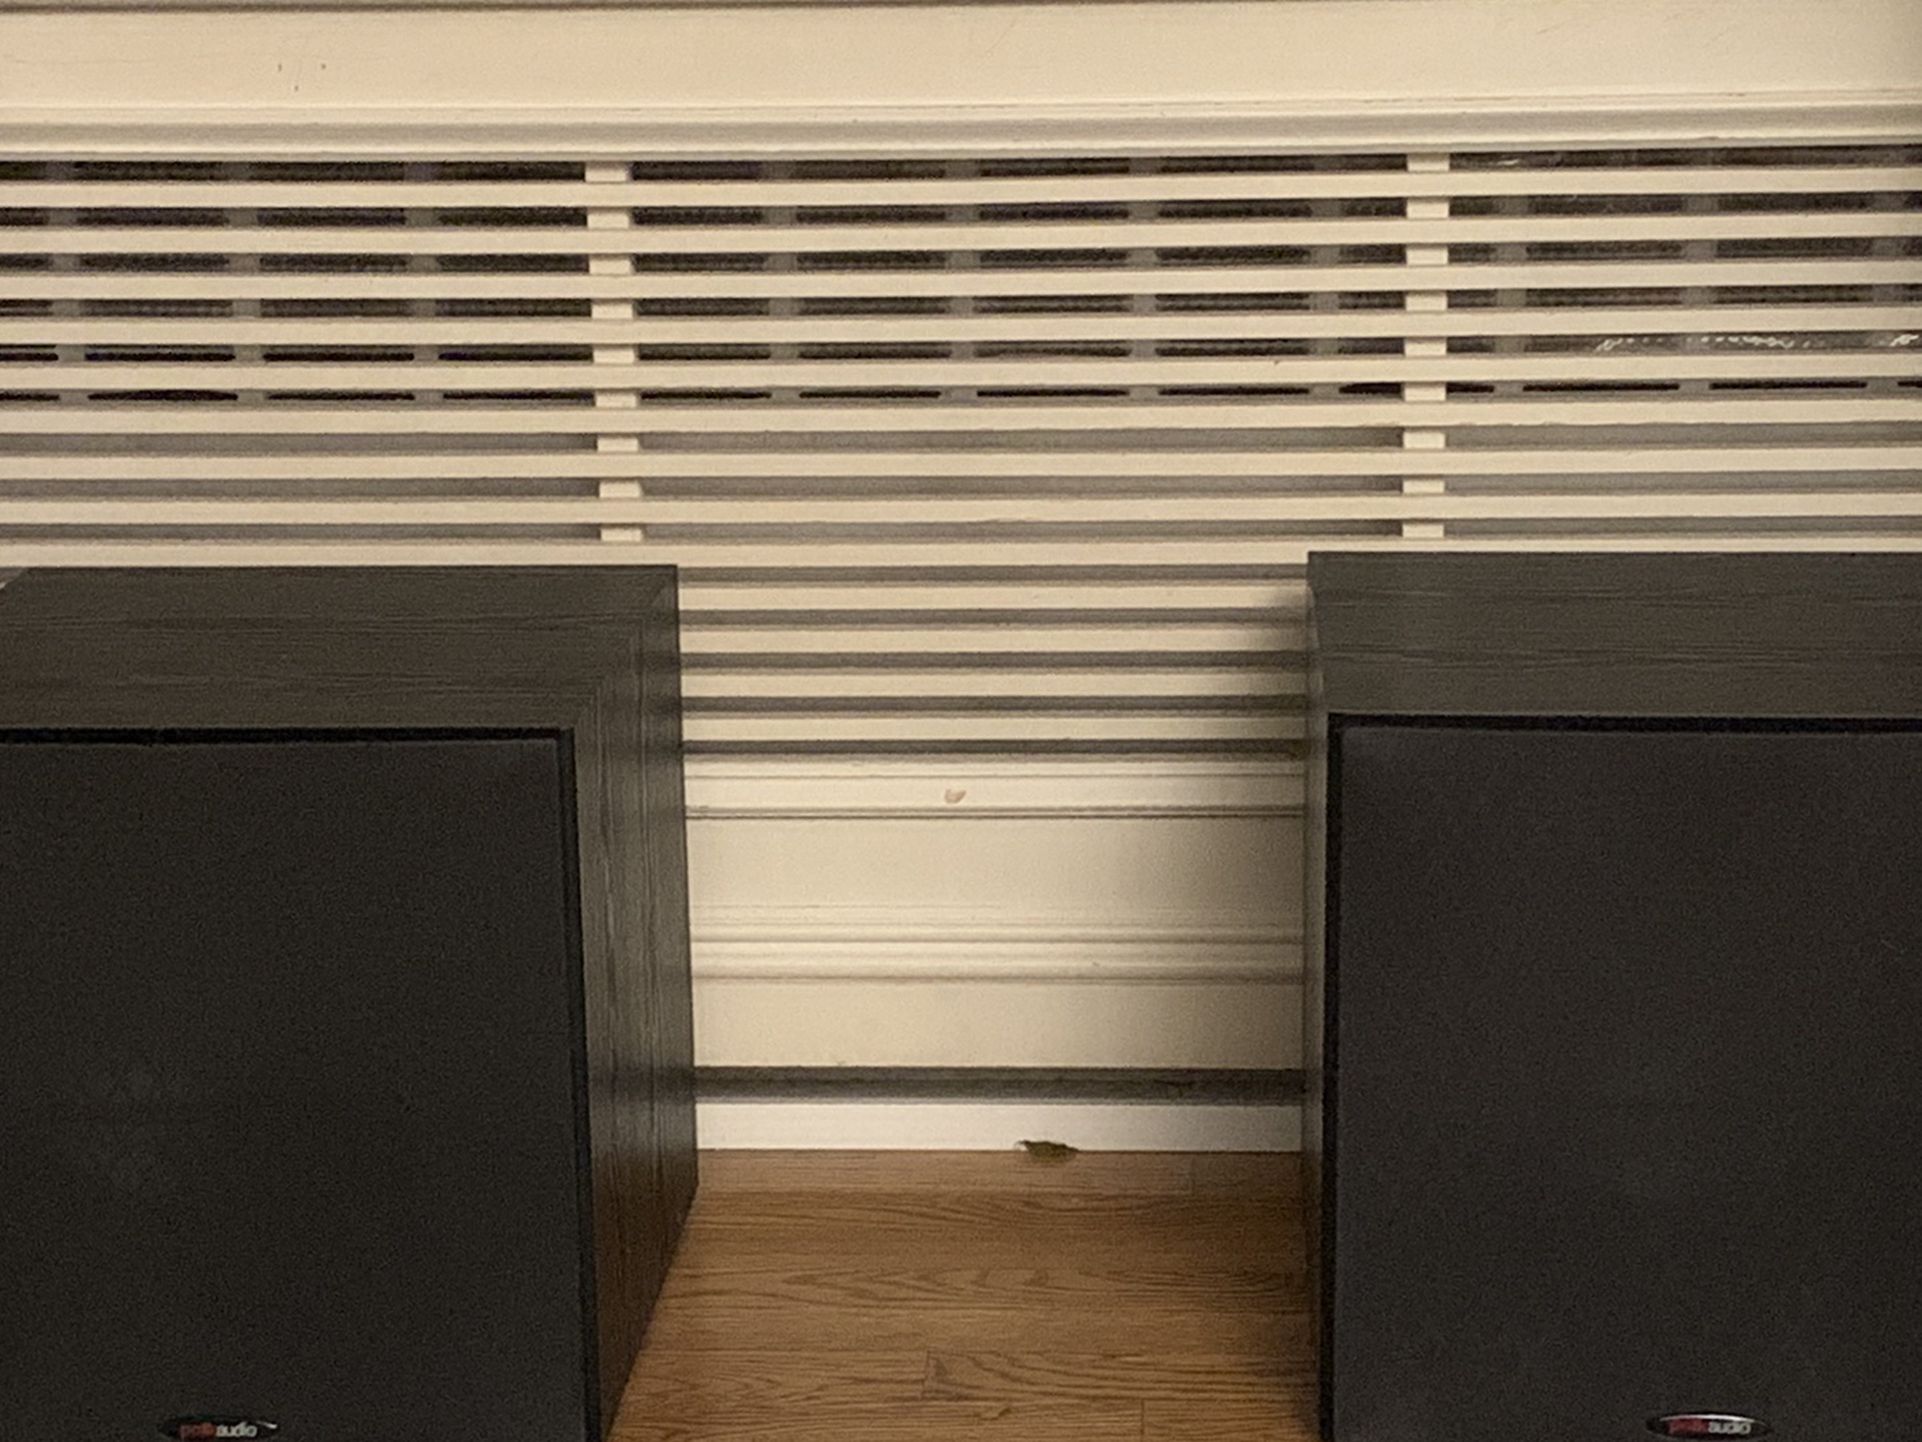 2 Polk Audio PSW10 •LIKE NEW •PICK UP ONLY